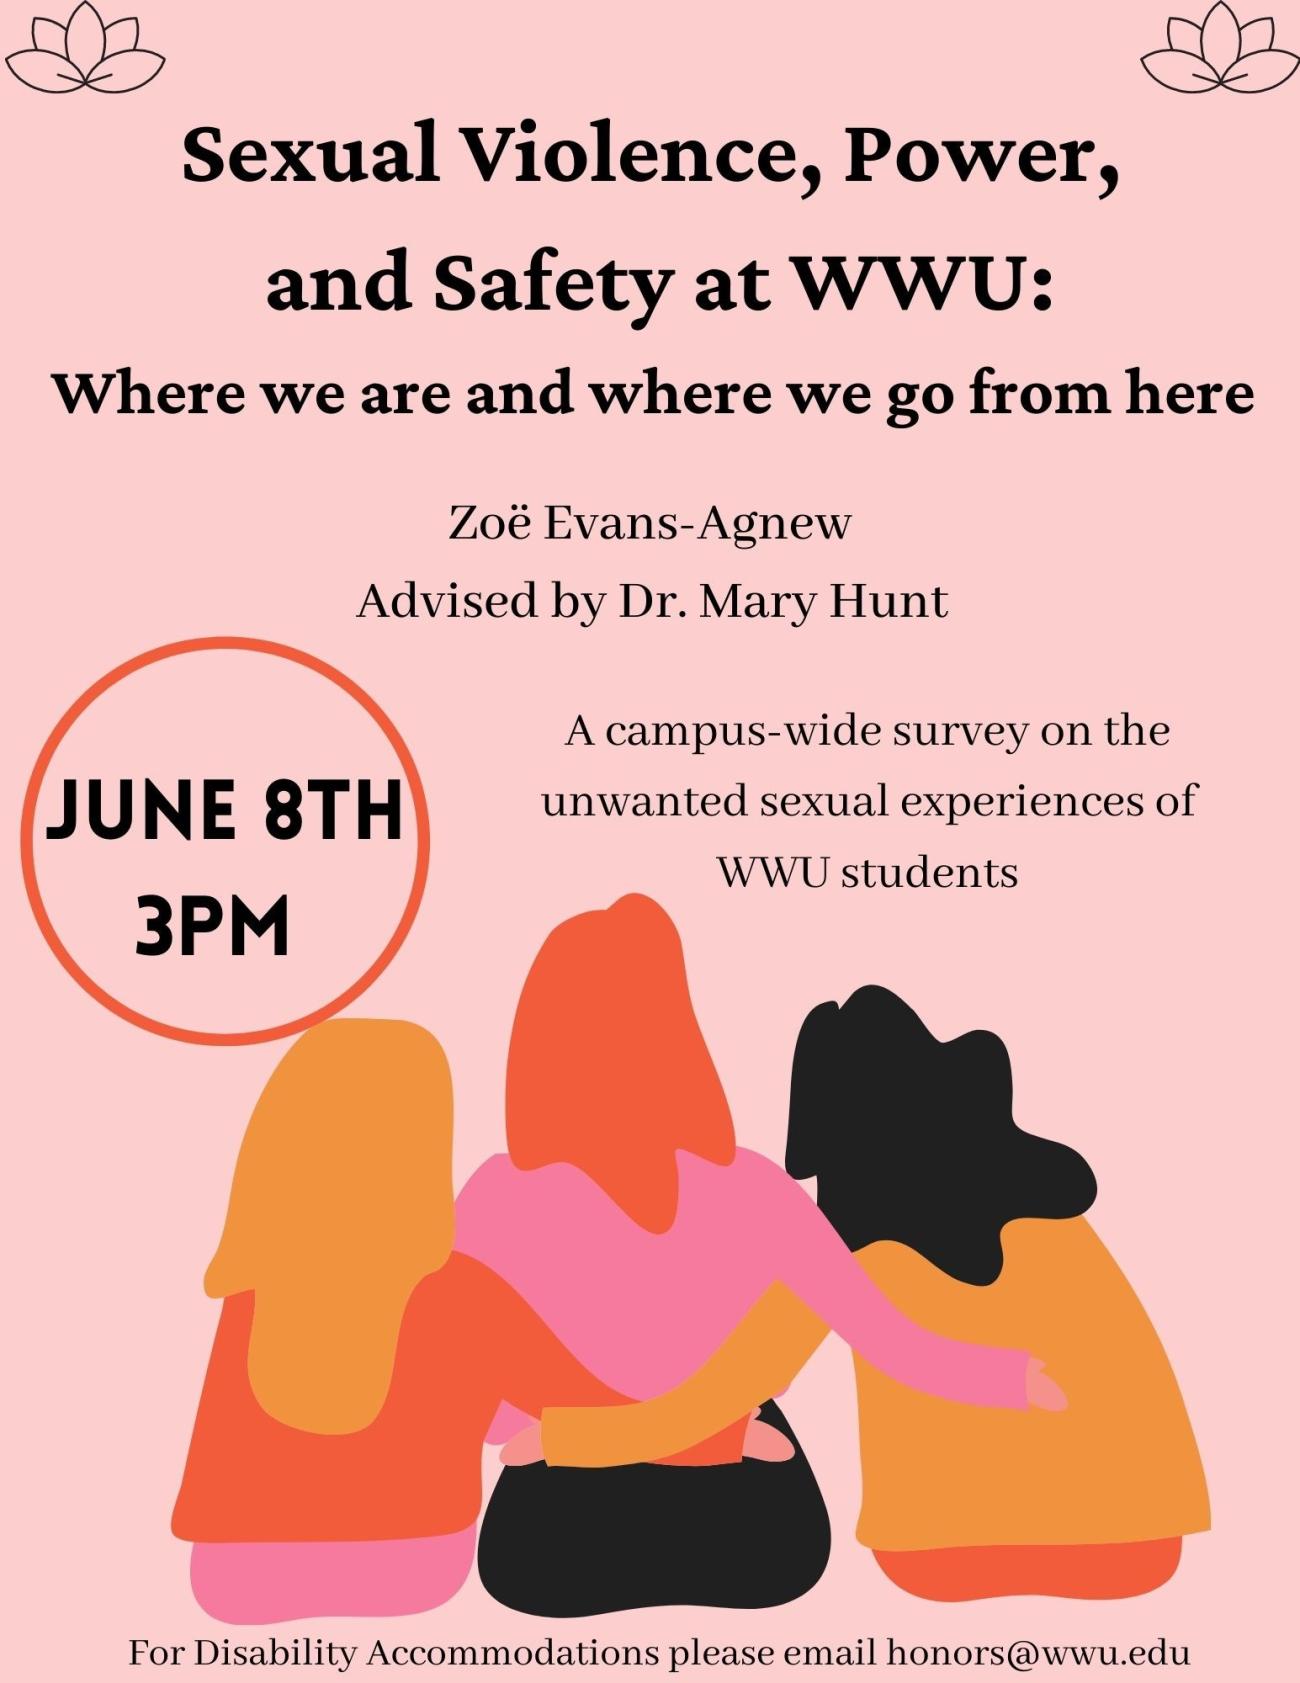 A pink background with lotus flowers at the top and 3 cartoon girls holding each other at the bottom. Description reads,  “Sexual Violence, Power, and Safety at WWU: Where we are and where we go from here.” By Zoë Evans-Agnew, Advised by Dr. Mary Hunt. A campus-wide survey on the unwanted sexual experiences of WWU students. June 8th at 3pm. For disability accommodations please contact honors@wwu.edu”.